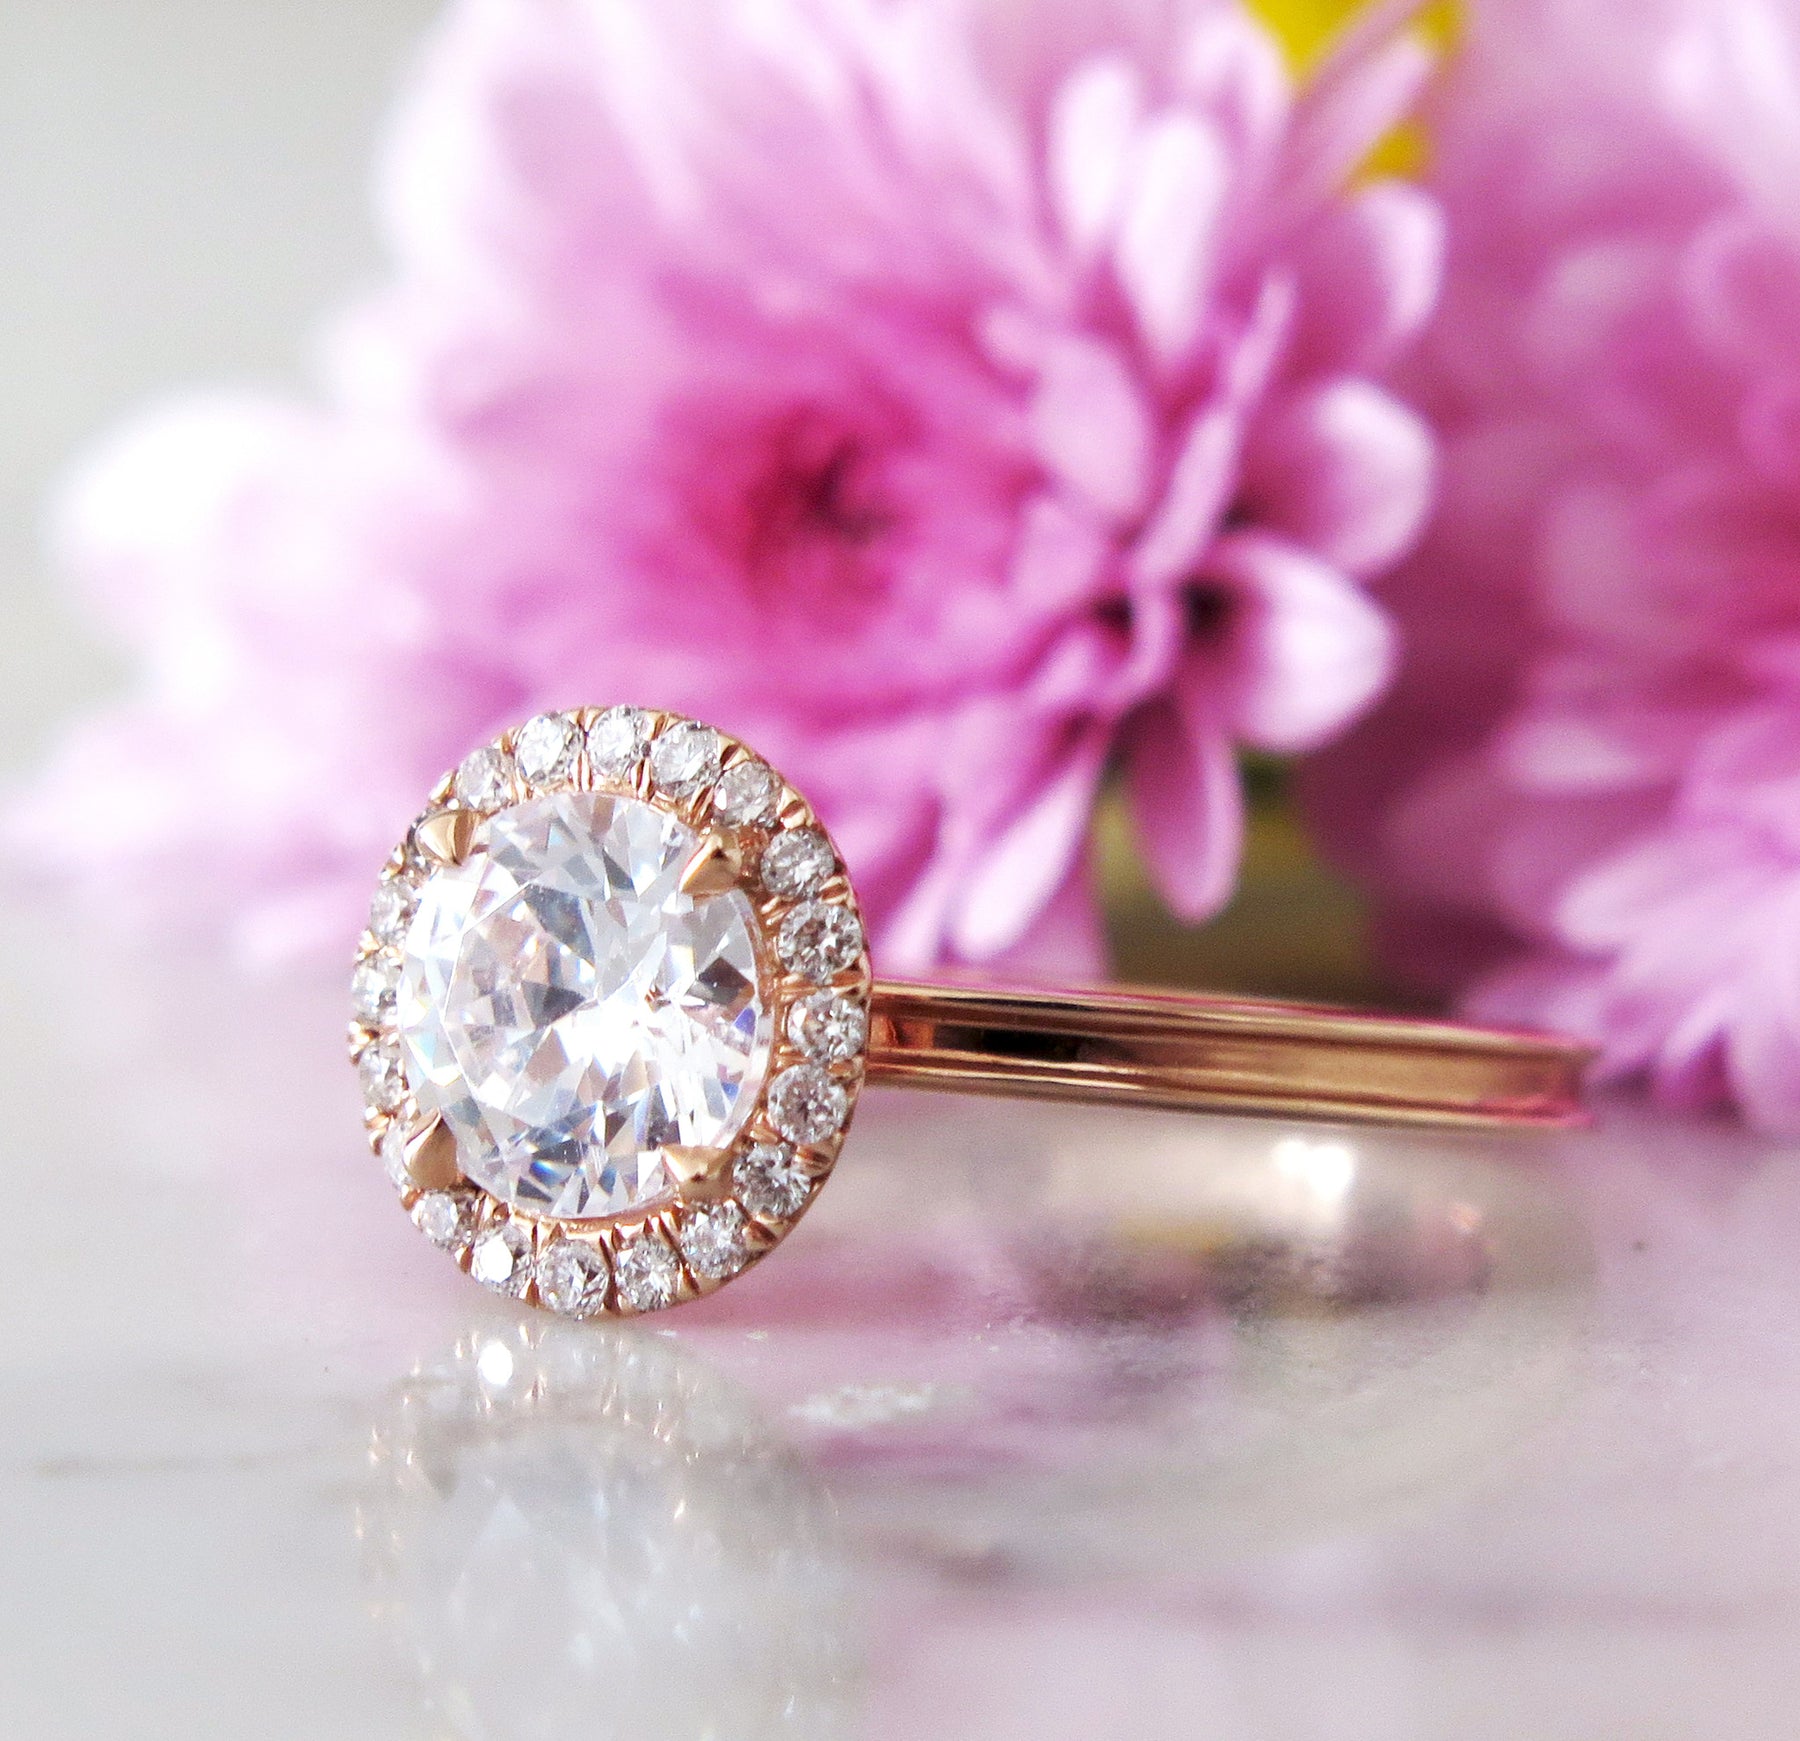 21 Conflict-Free Engagement Rings from MiaDonna | Junebug Weddings